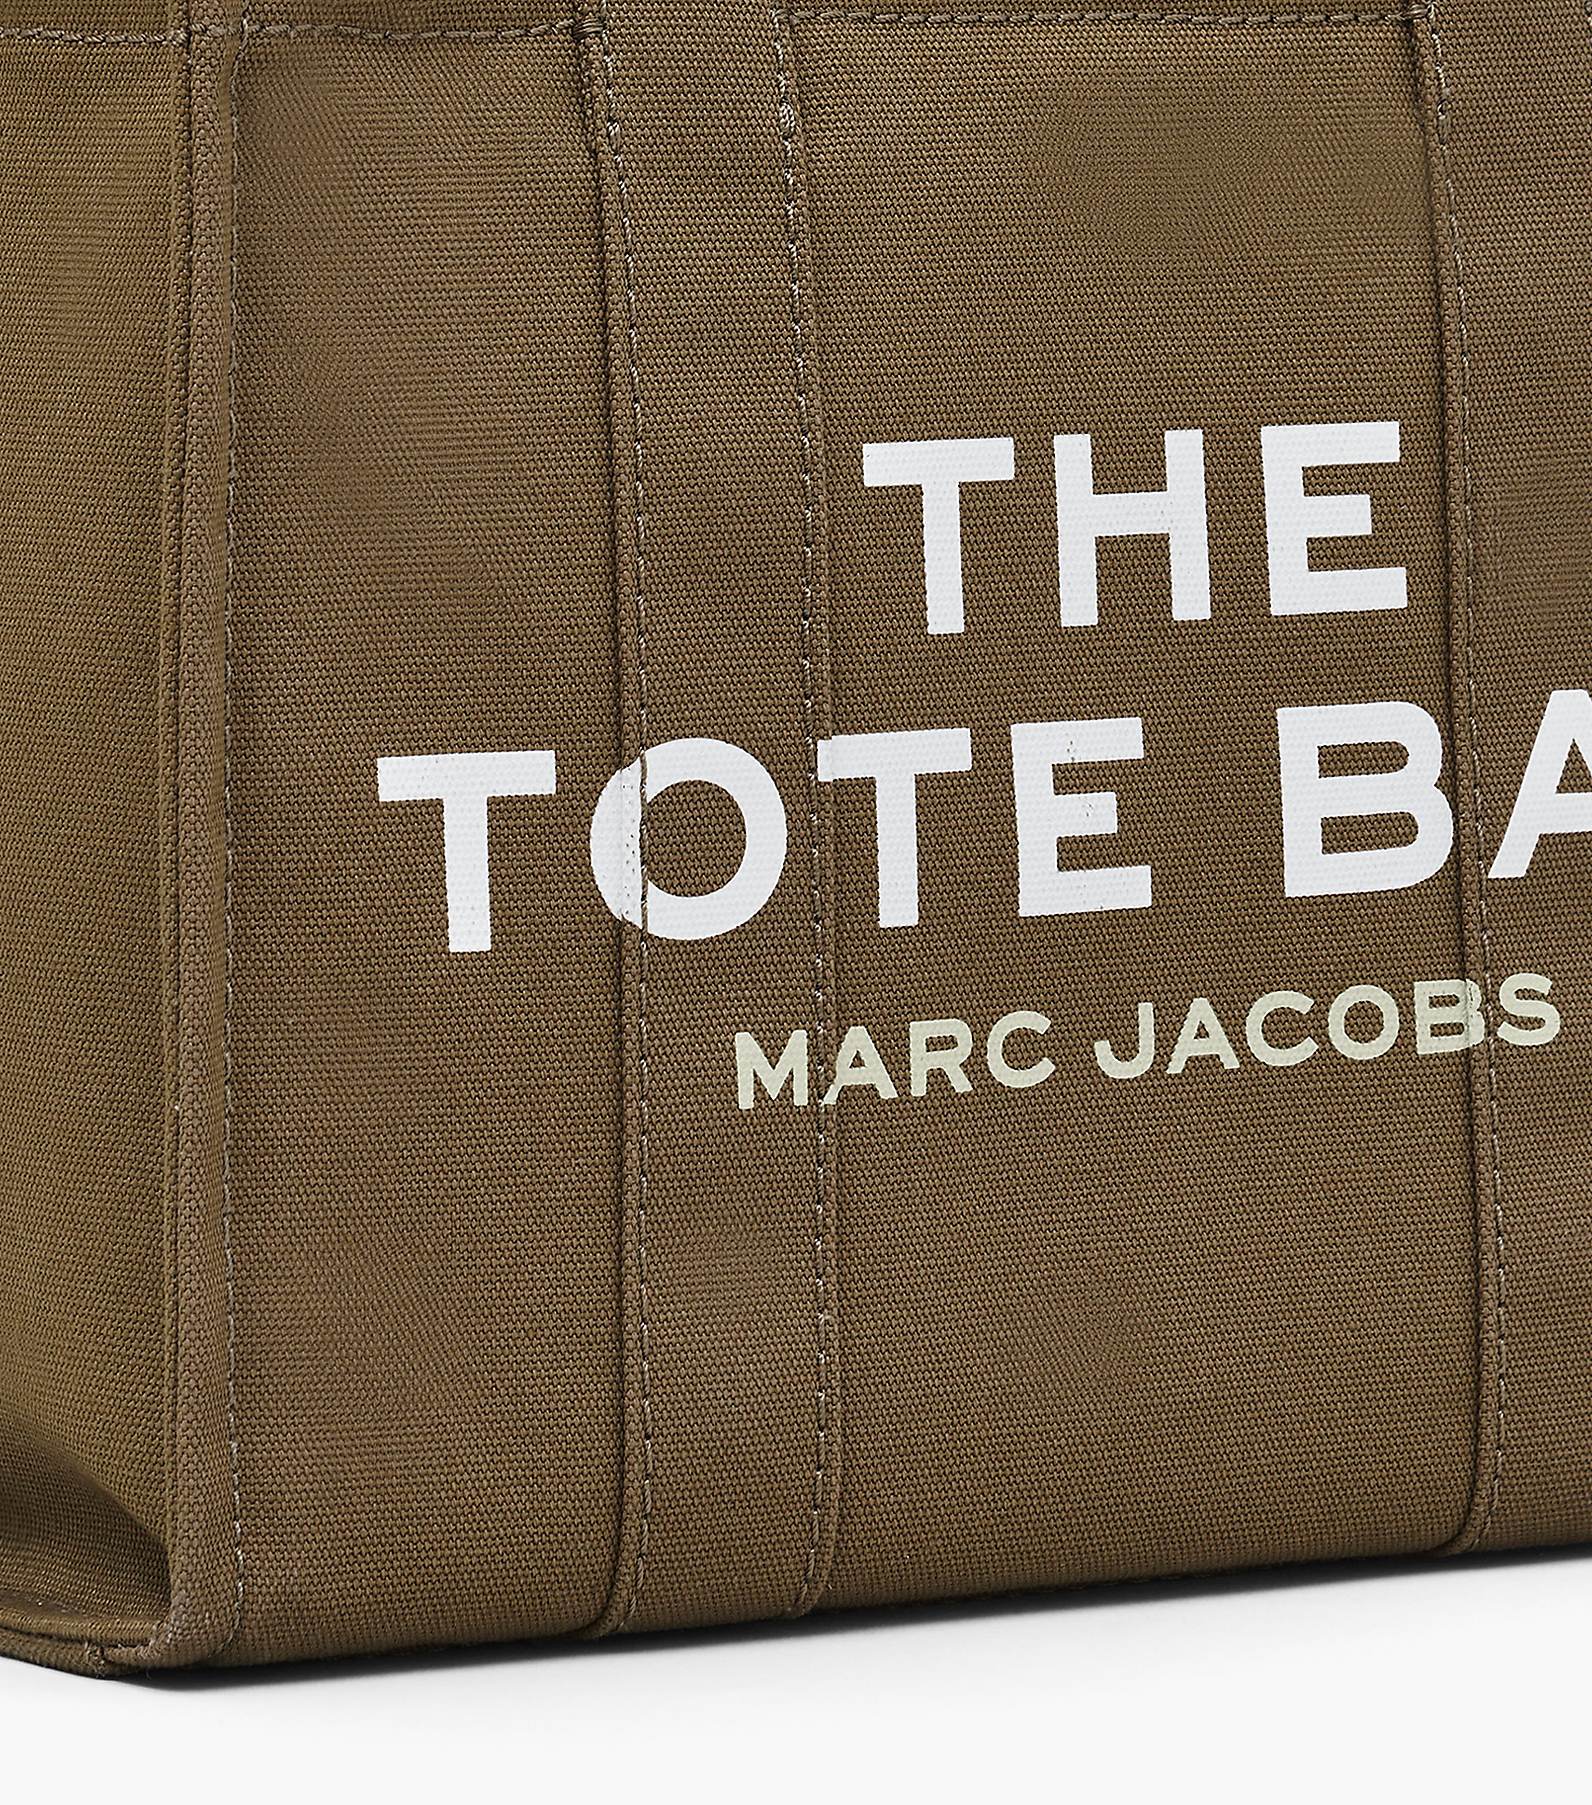 best marc jacobs bags: 7 Best Marc Jacobs bags to add into your